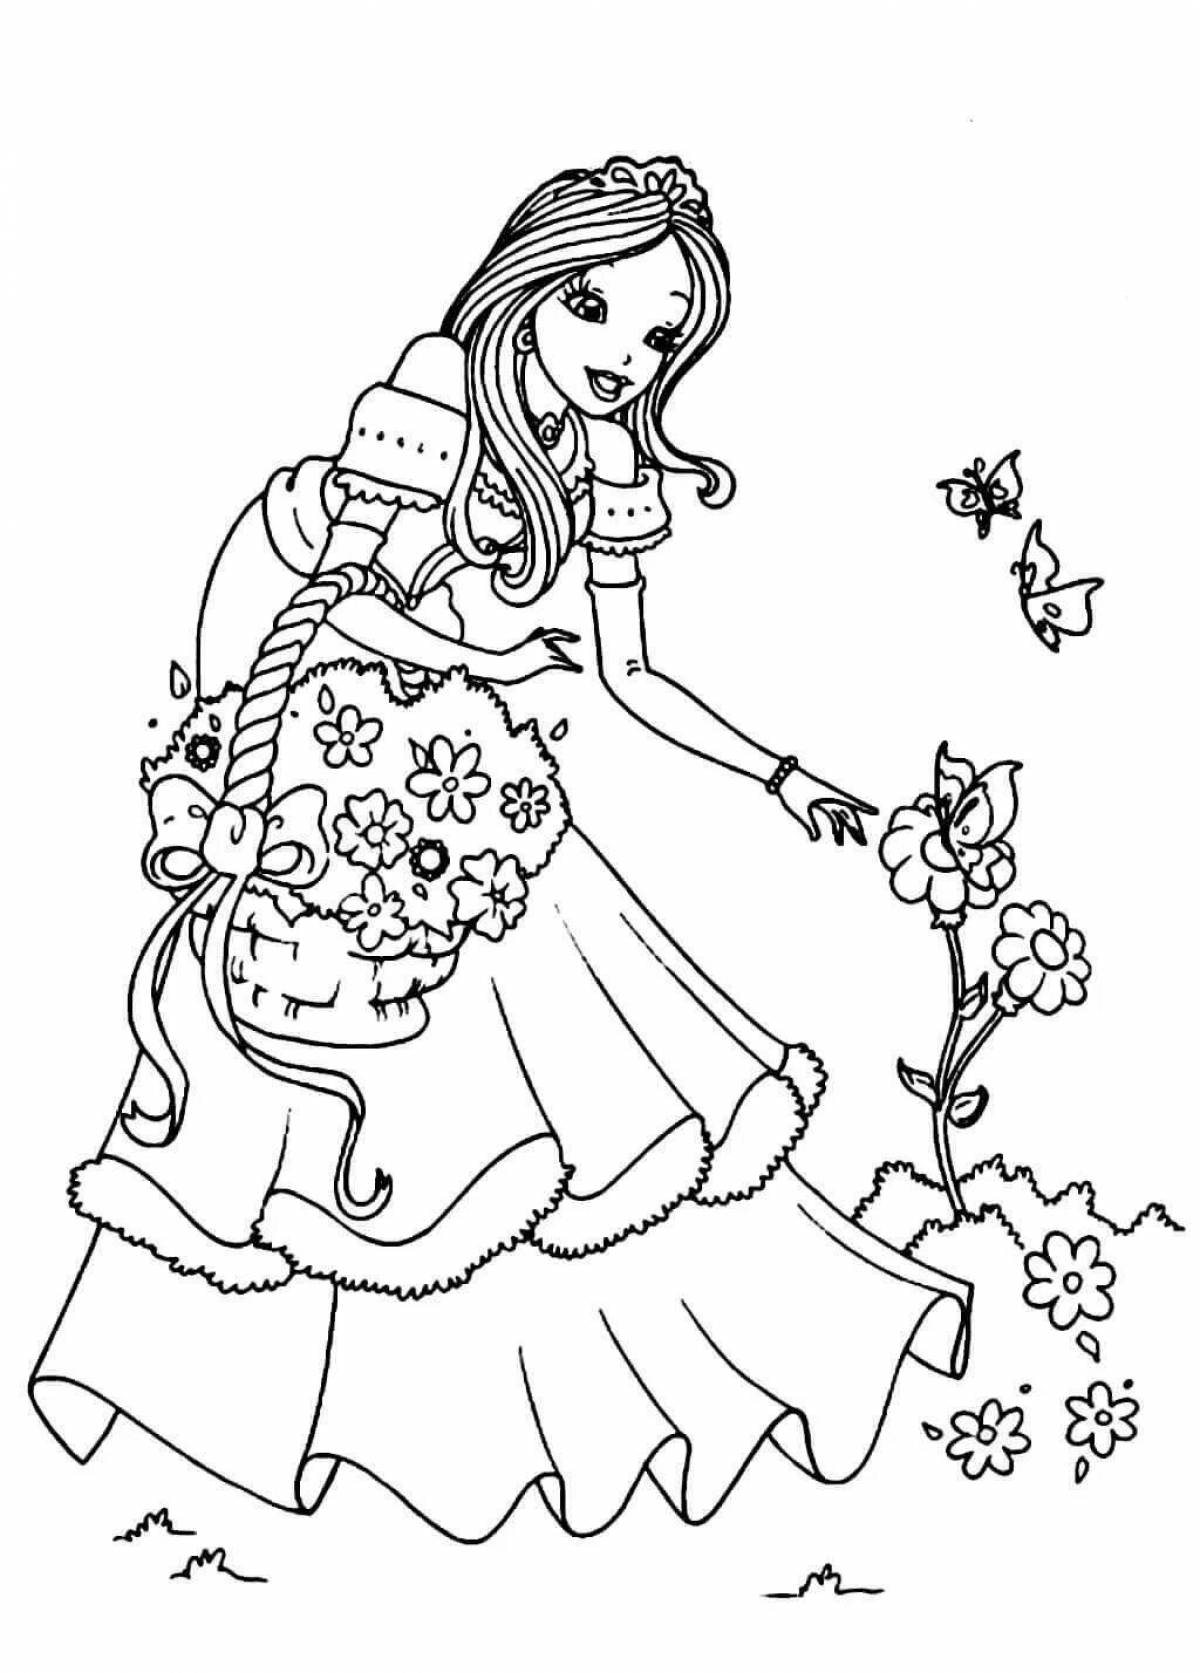 Exquisite coloring book for girls beautiful princesses